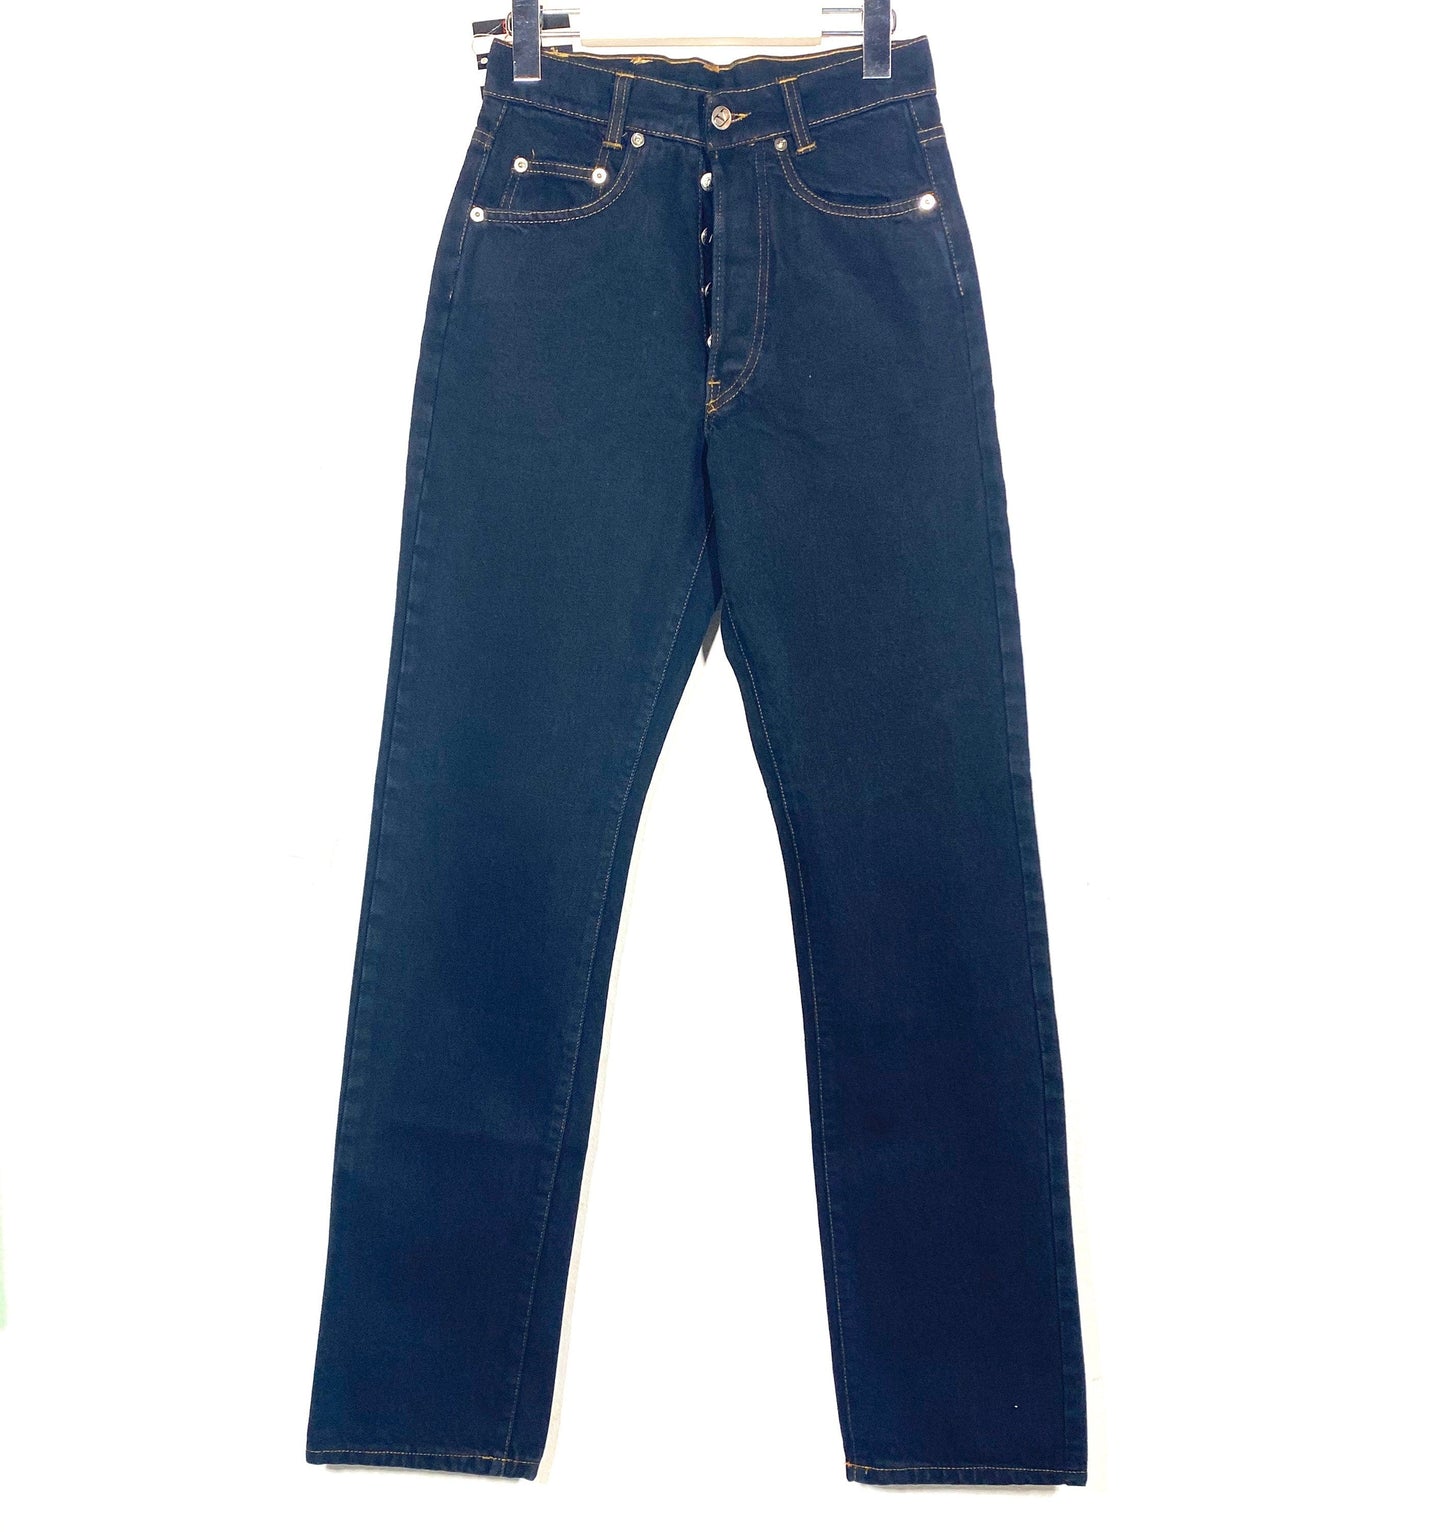 Valentino 90s NOS black denim jeans trousers, available in sizes 28 and 30